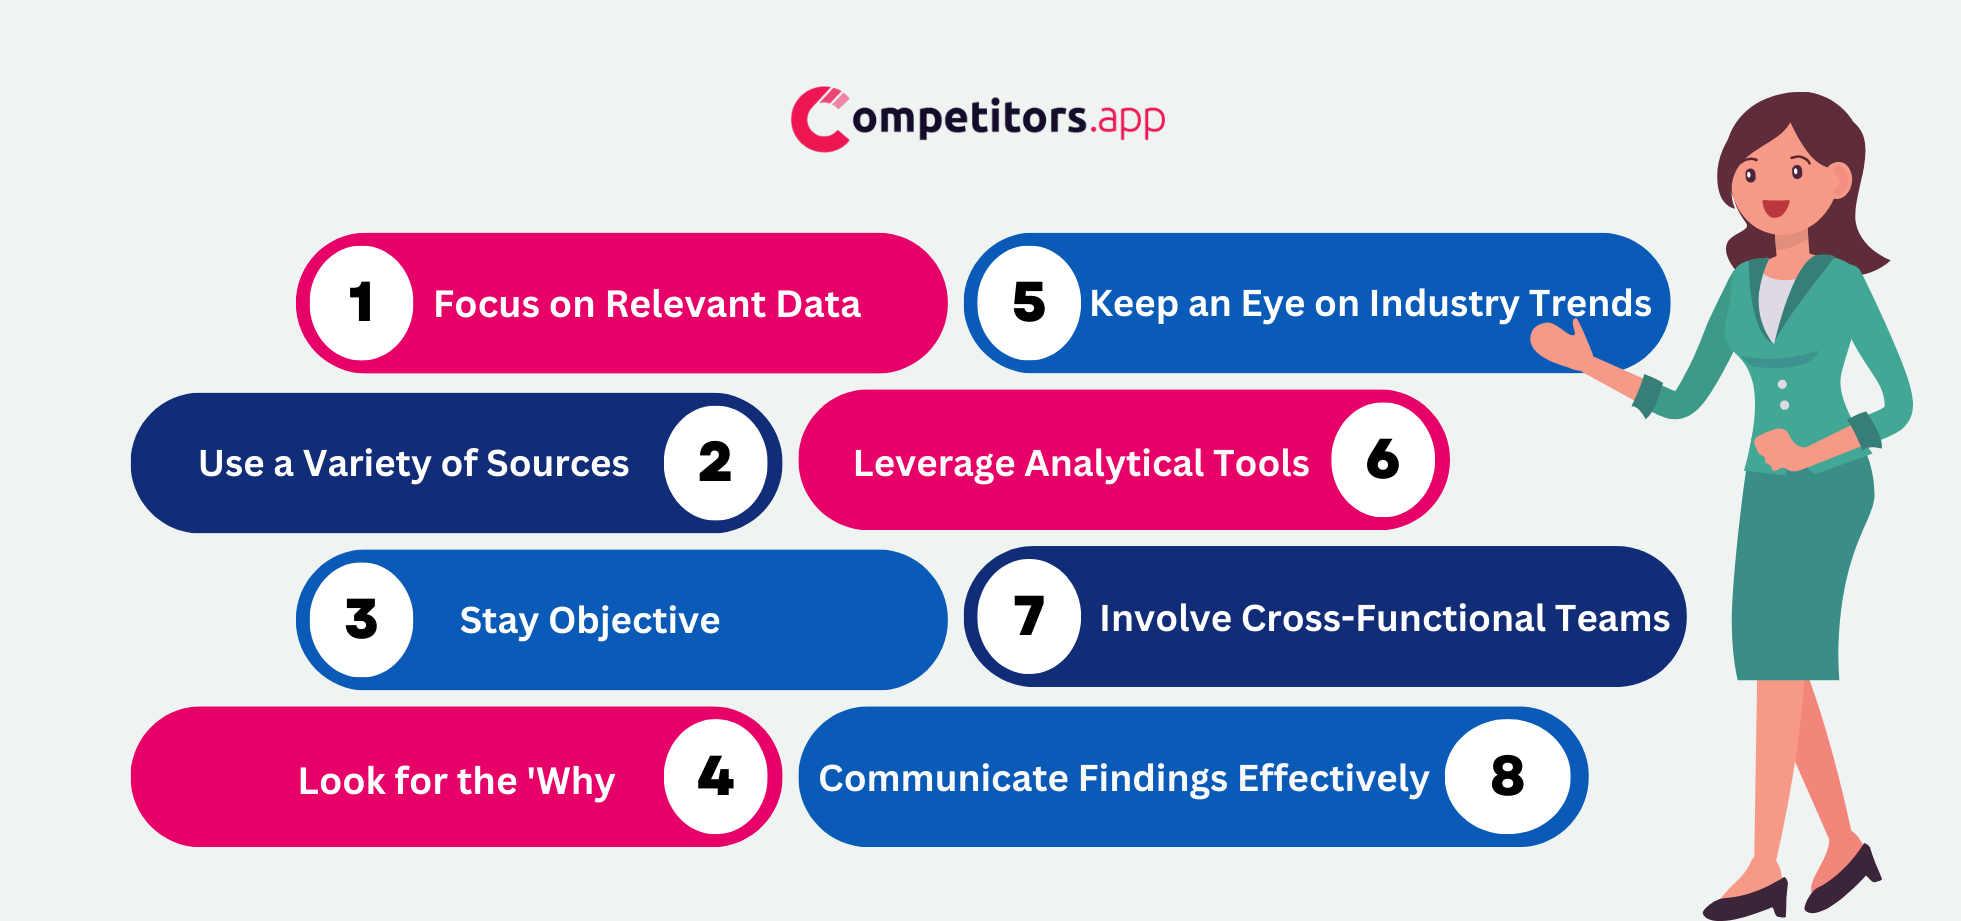 conduct an Effective Competitive Intelligence Analysis